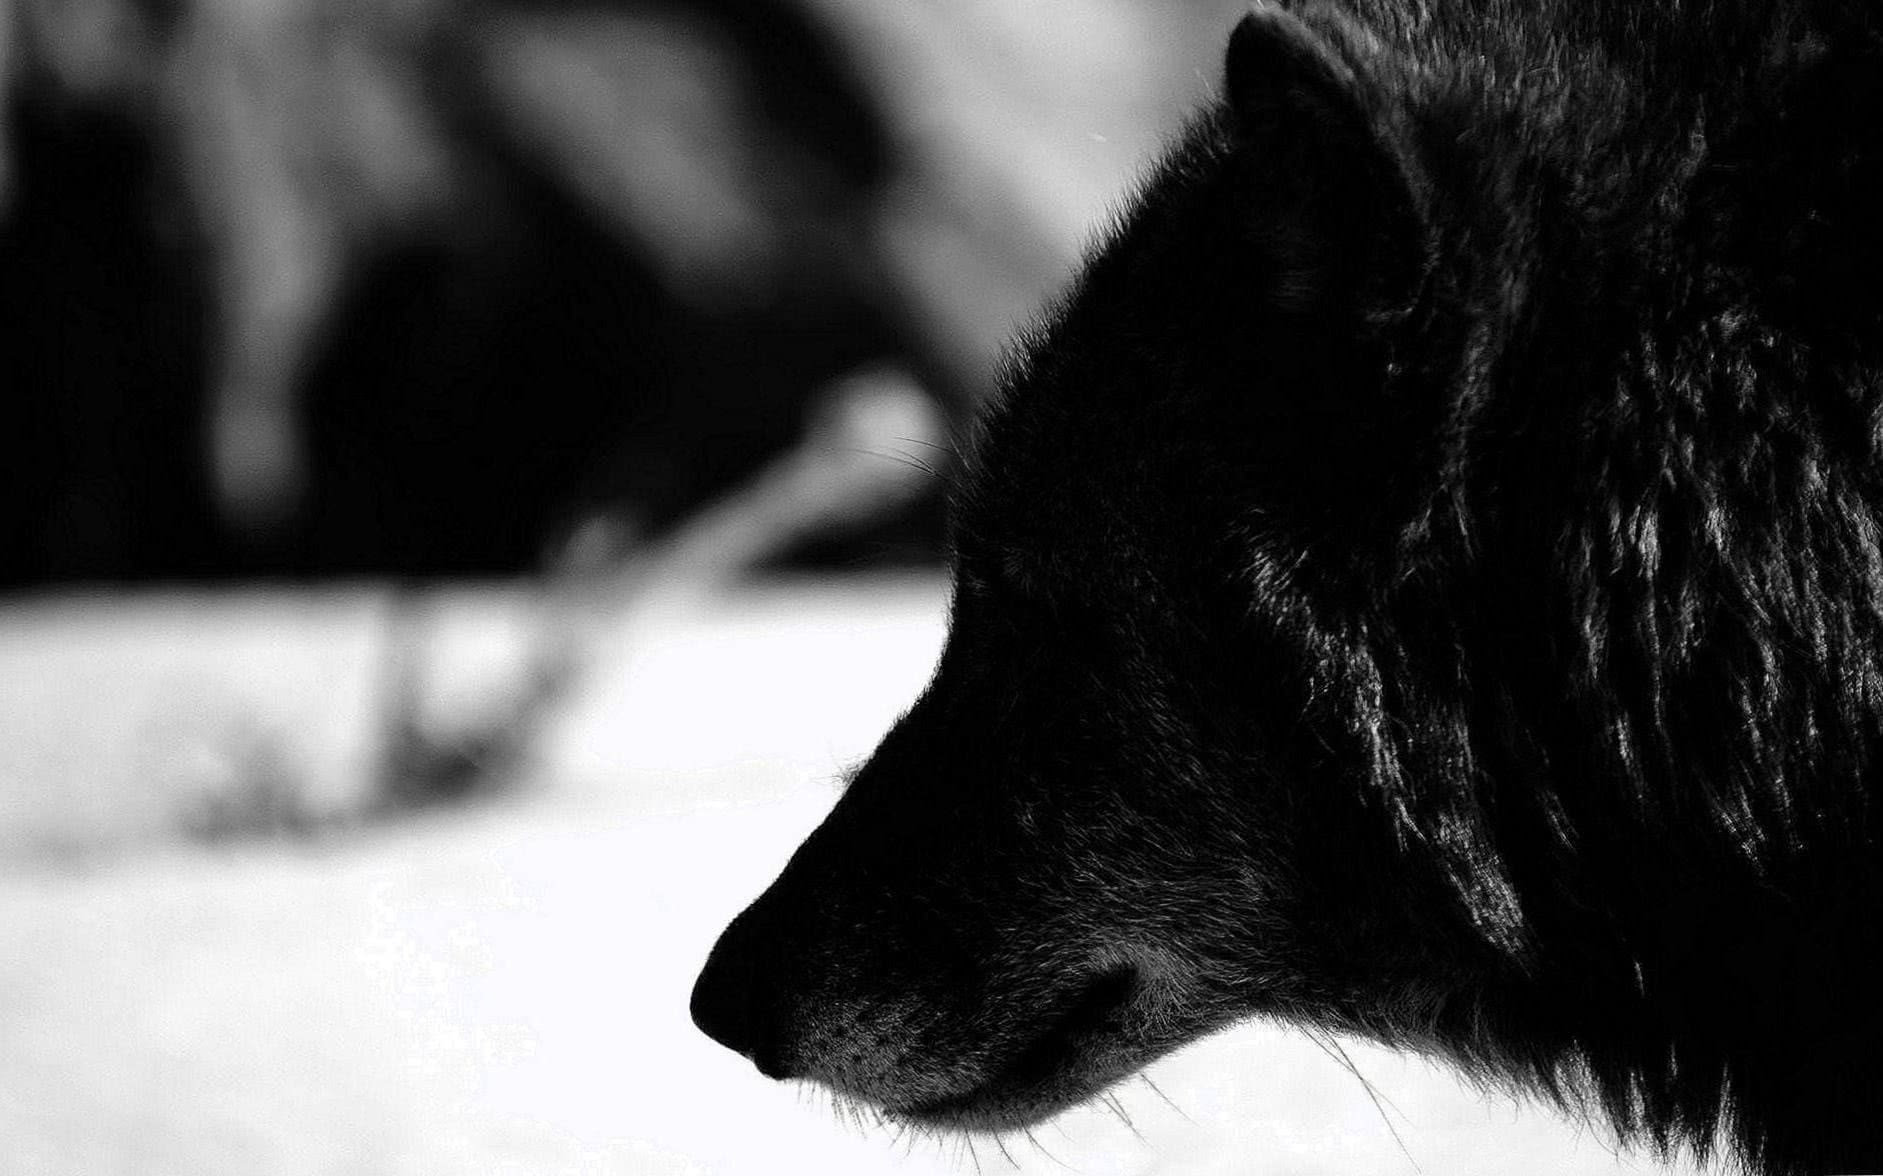 Black Wolf HD Wallpapers For Android